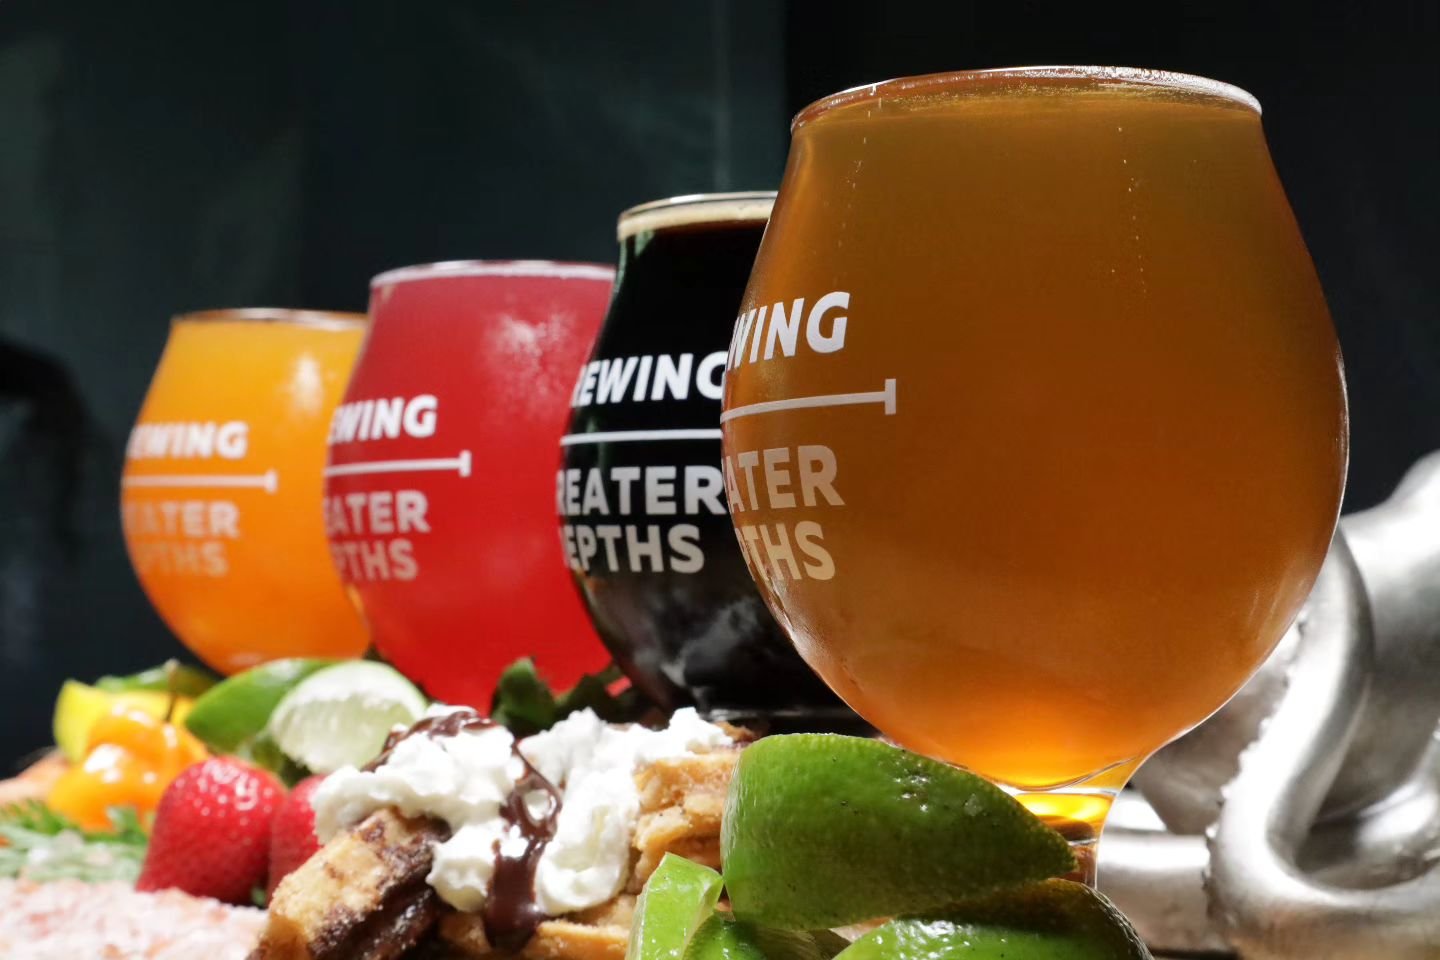 Here's a quick sneak peek at Sunday's SINKO DE MAYO @ DEEP W/ VATO TACOS! 🇲🇽 🌮 🍻  lineup!

From left: 

🇲🇽 PROFUNDO - Mexican-style Lager w/ lime
🇲🇽 CHURRO STOUT - Stout with cacao, cinnamon, ancho chilis, and muscovado sugar
🇲🇽 STRAWBERRY 